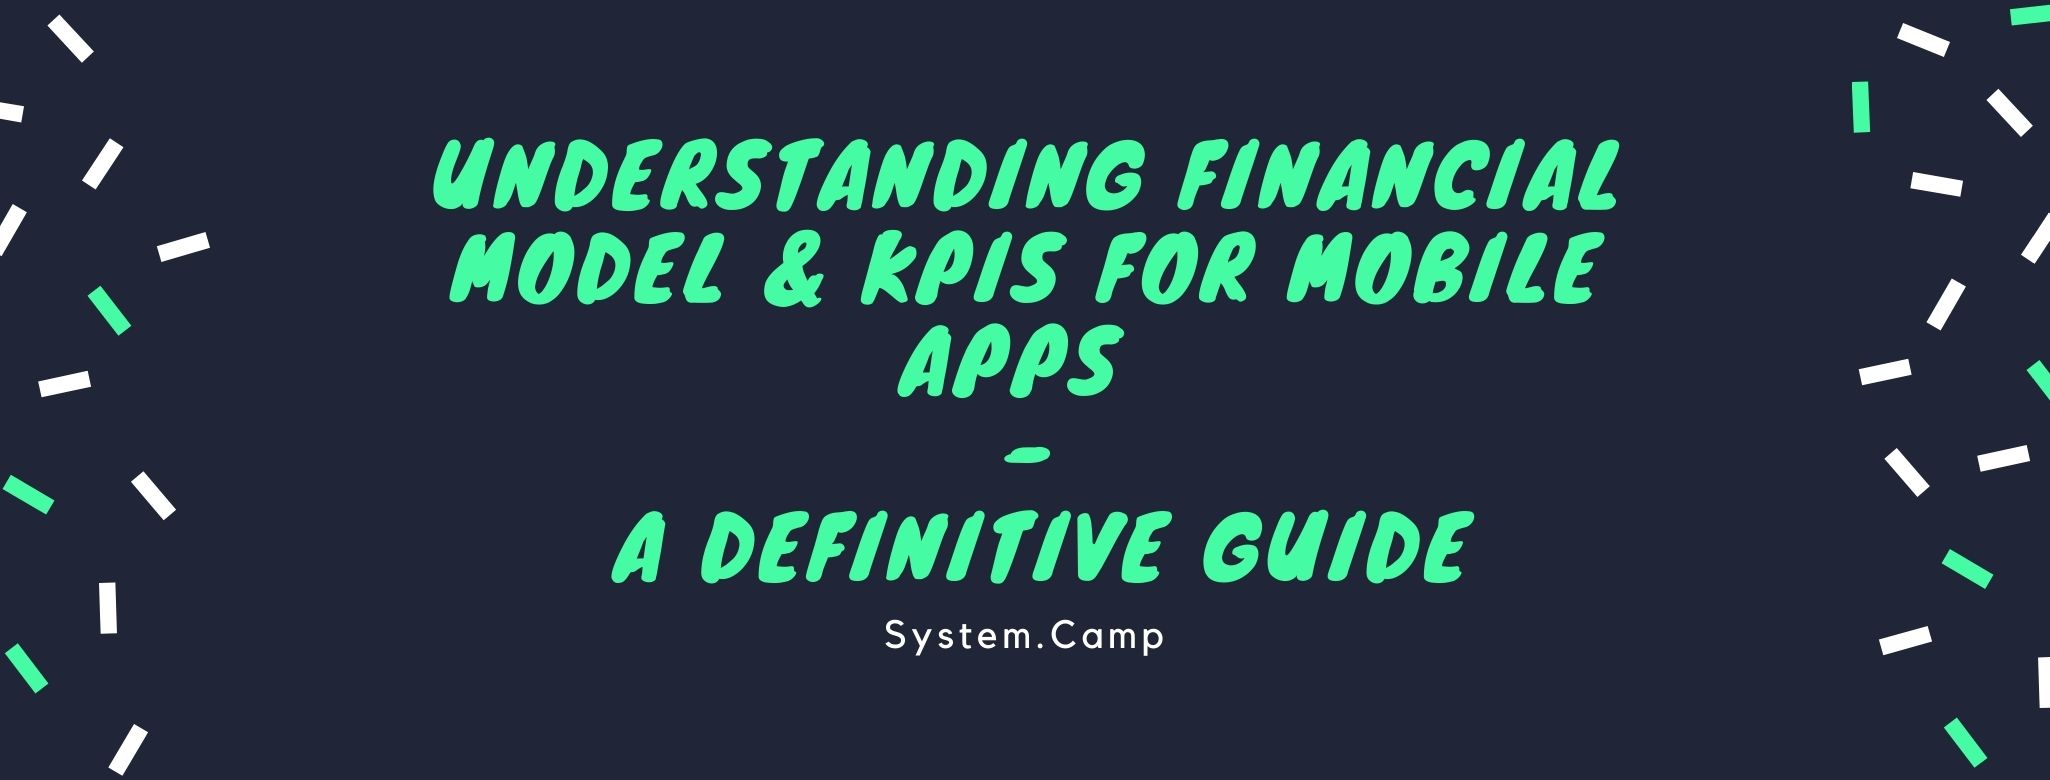 Understanding-Financial-Model-using-KPIs-for-mobile-apps---A-definitive-Guide